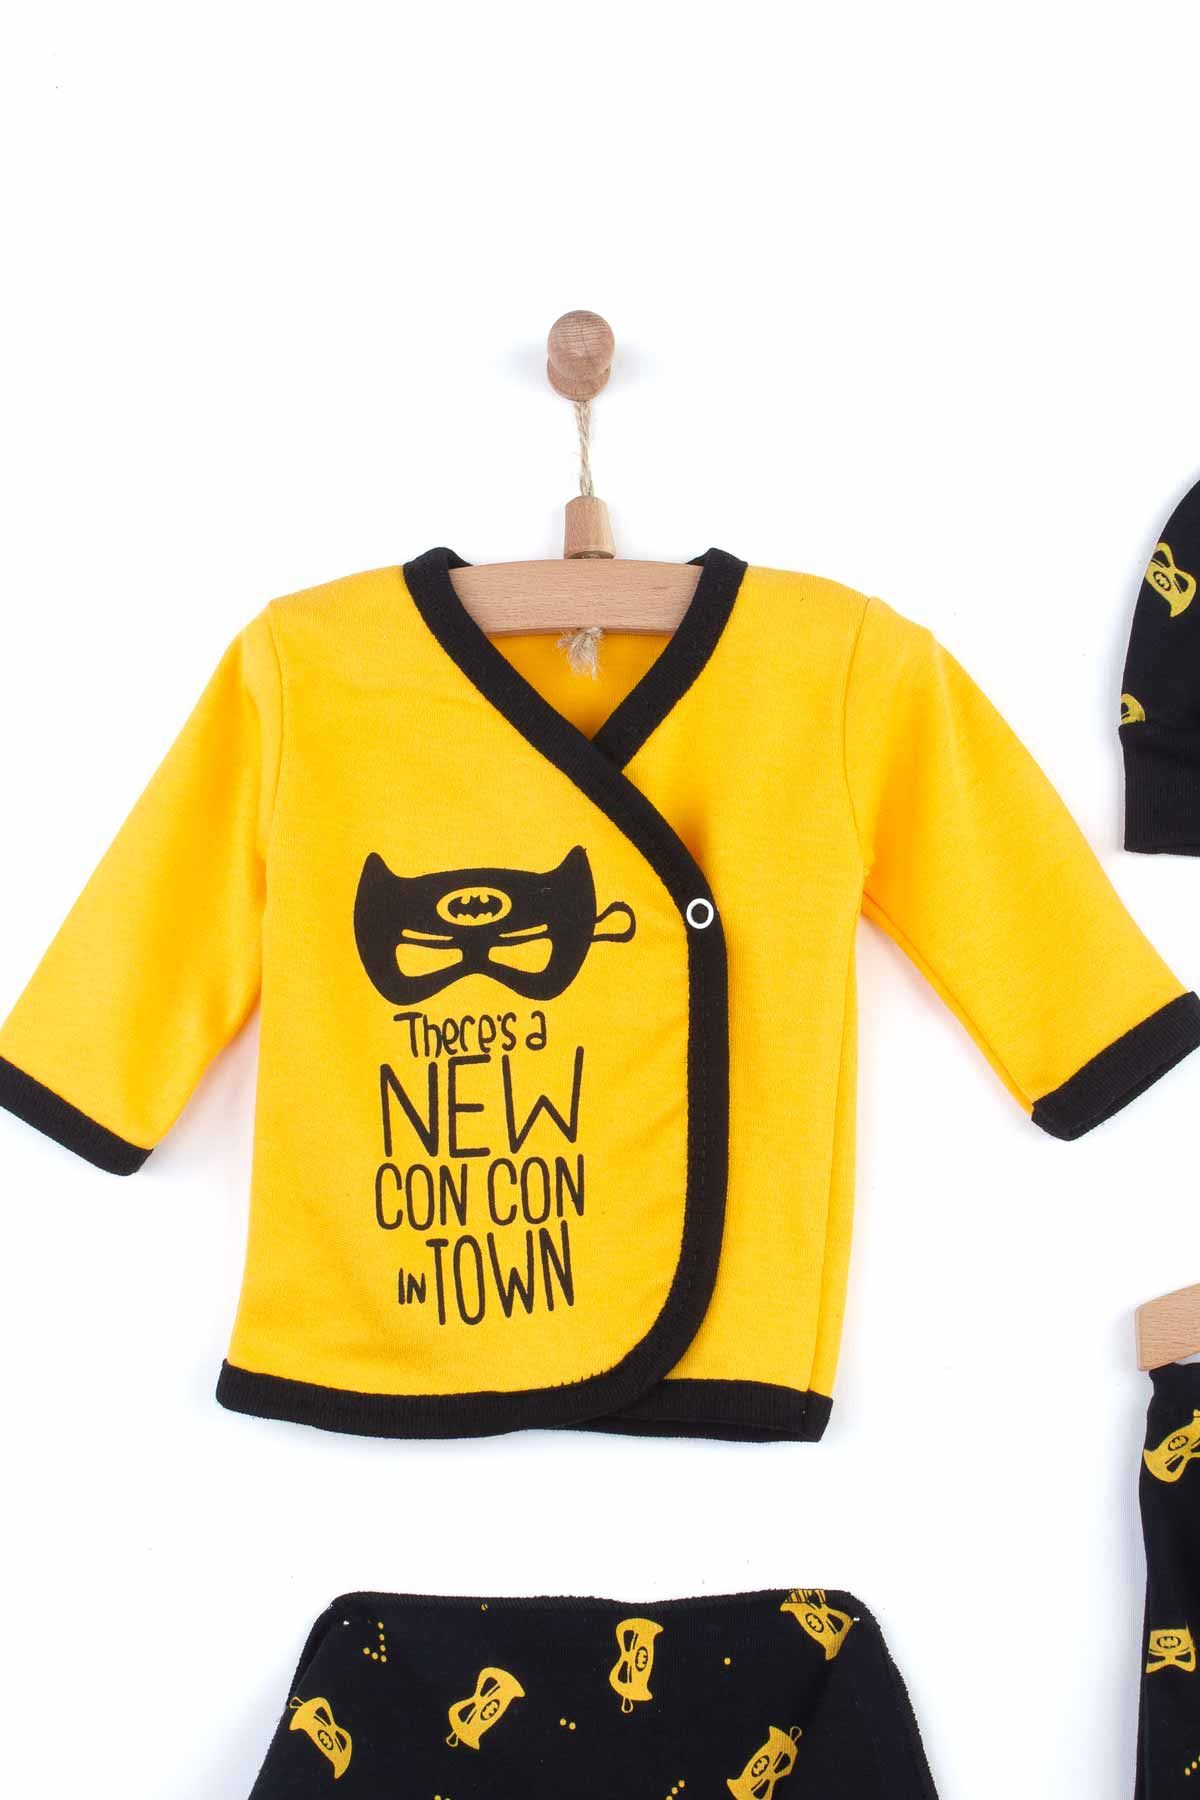 Girls Baby Boy Newborn Clothing 5-Piece set Cotton Fabric Batman Boys Babies Summer Clothes Gift Daily Casual Stylish outfit Mod